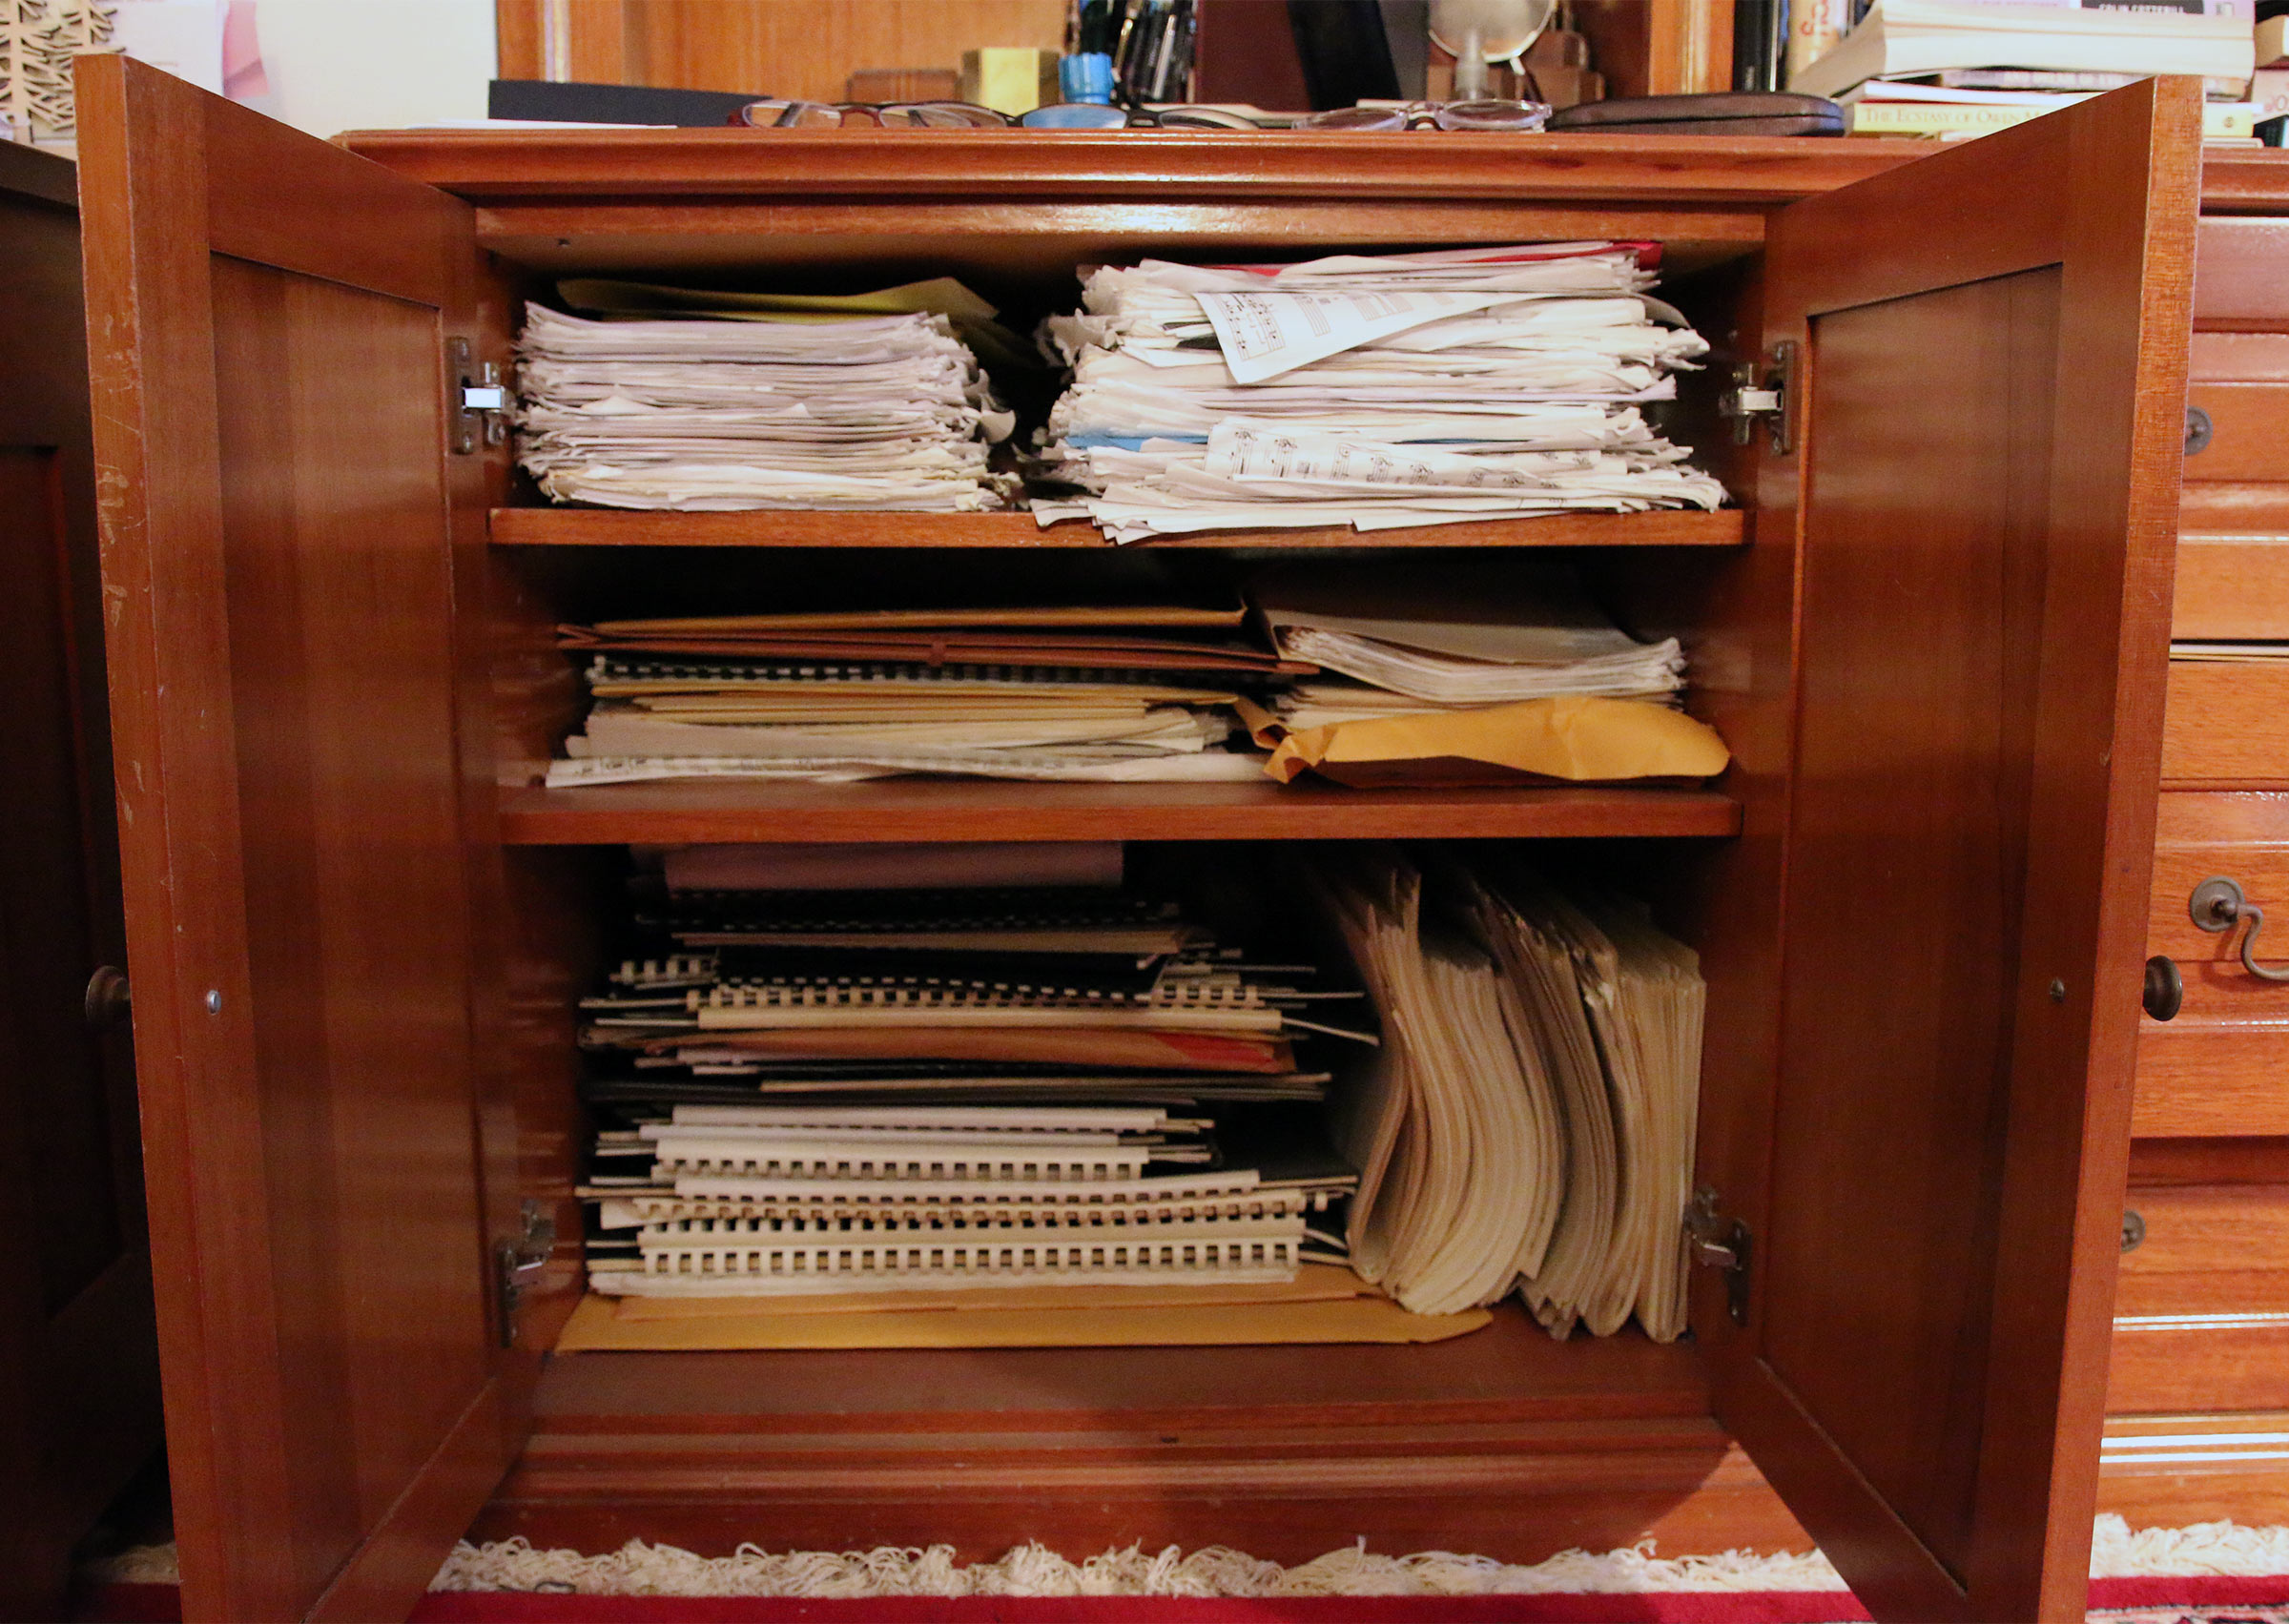 Shelves in Jane Ira Bloom's cabinet filled with her orchestral scores and parts.